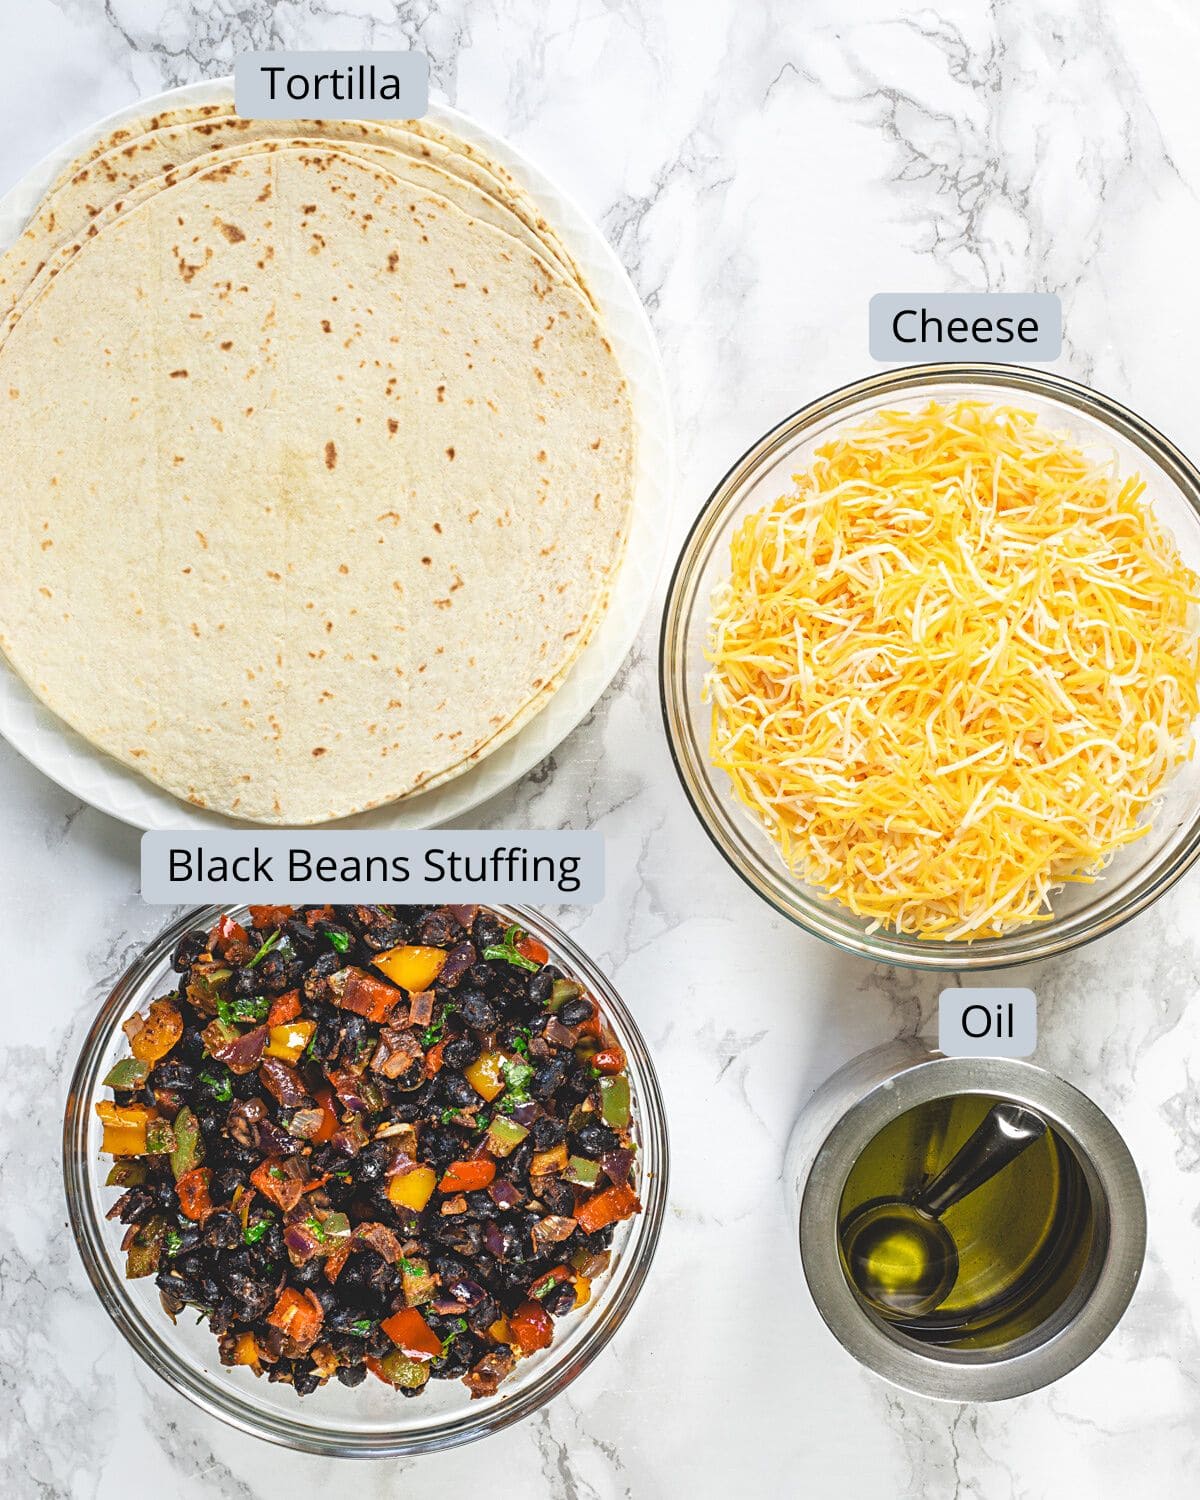 Black bean quesadilla stuffing and cheese in bowls with oil and tortillas with labels.